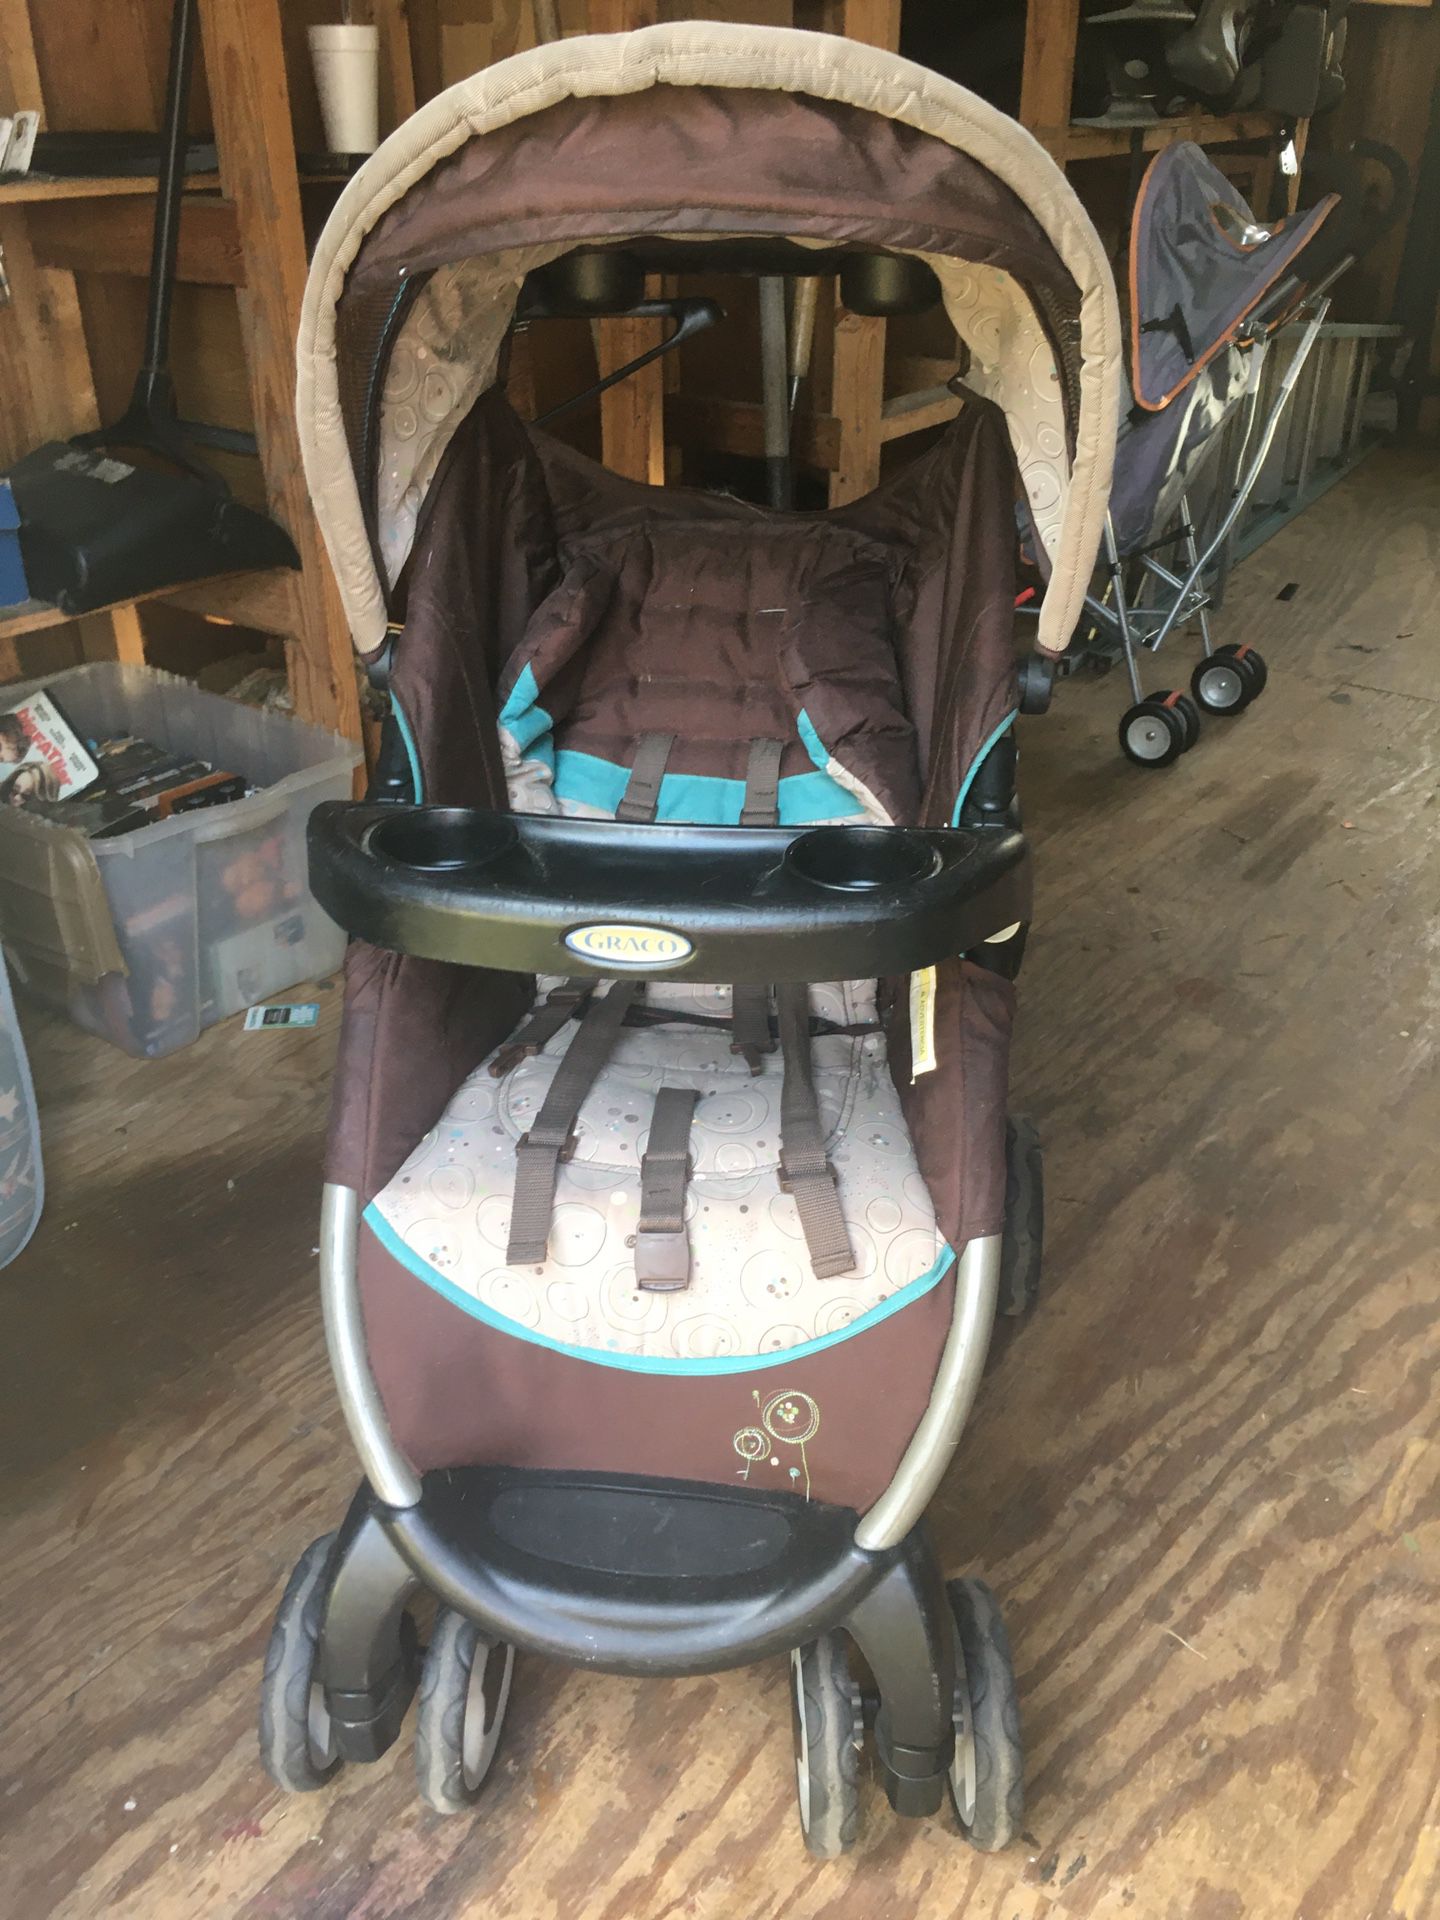 GRACO STROLLER IN EXCELLENT CONDITION